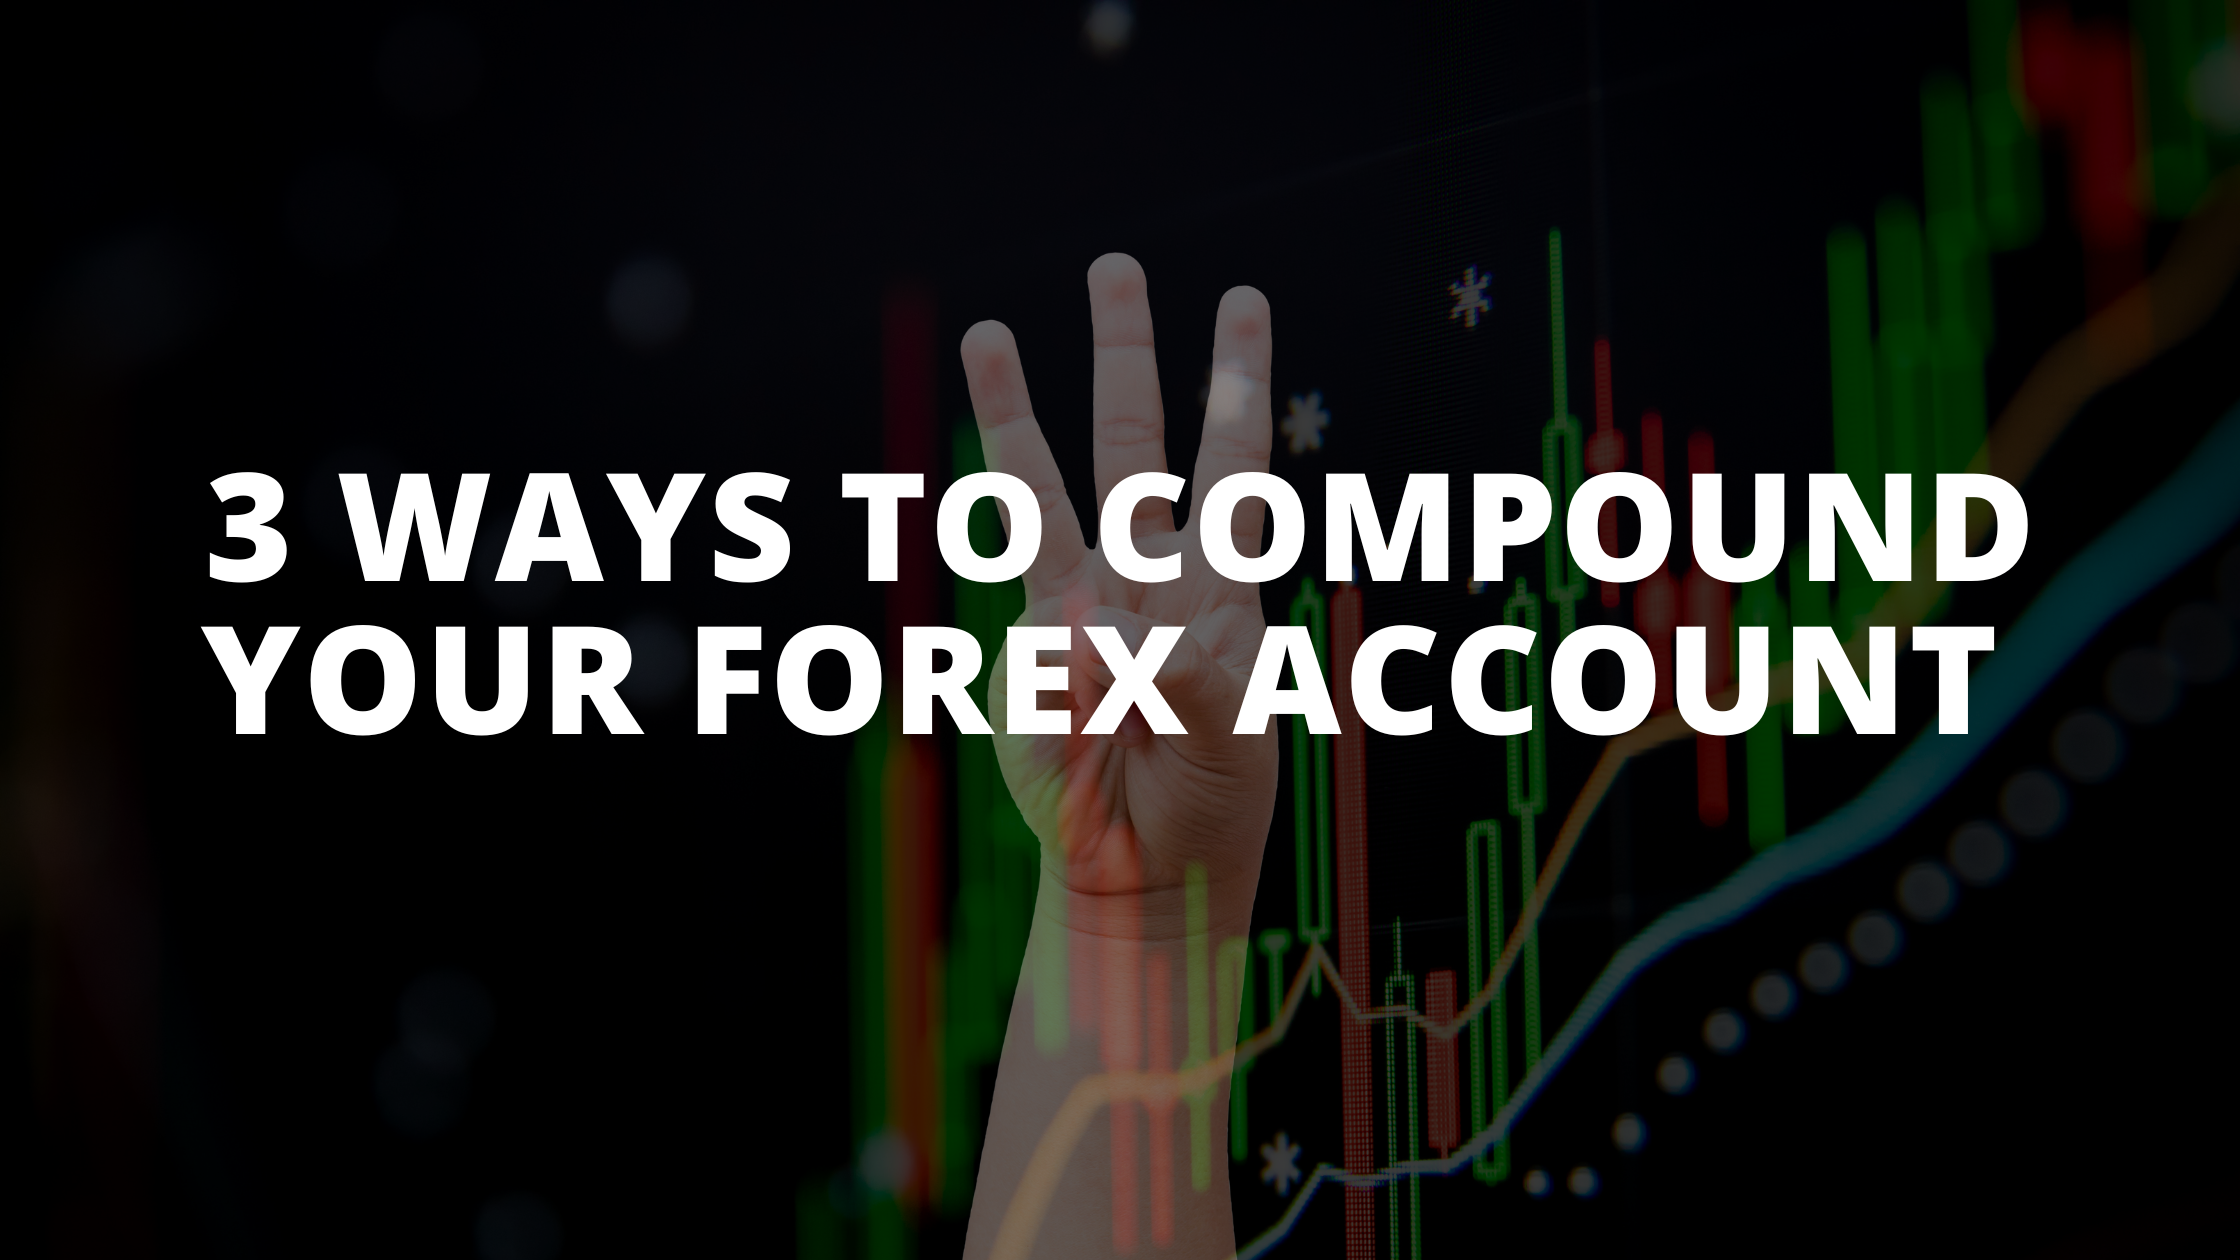 3 Ways To Compound Your Forex Account